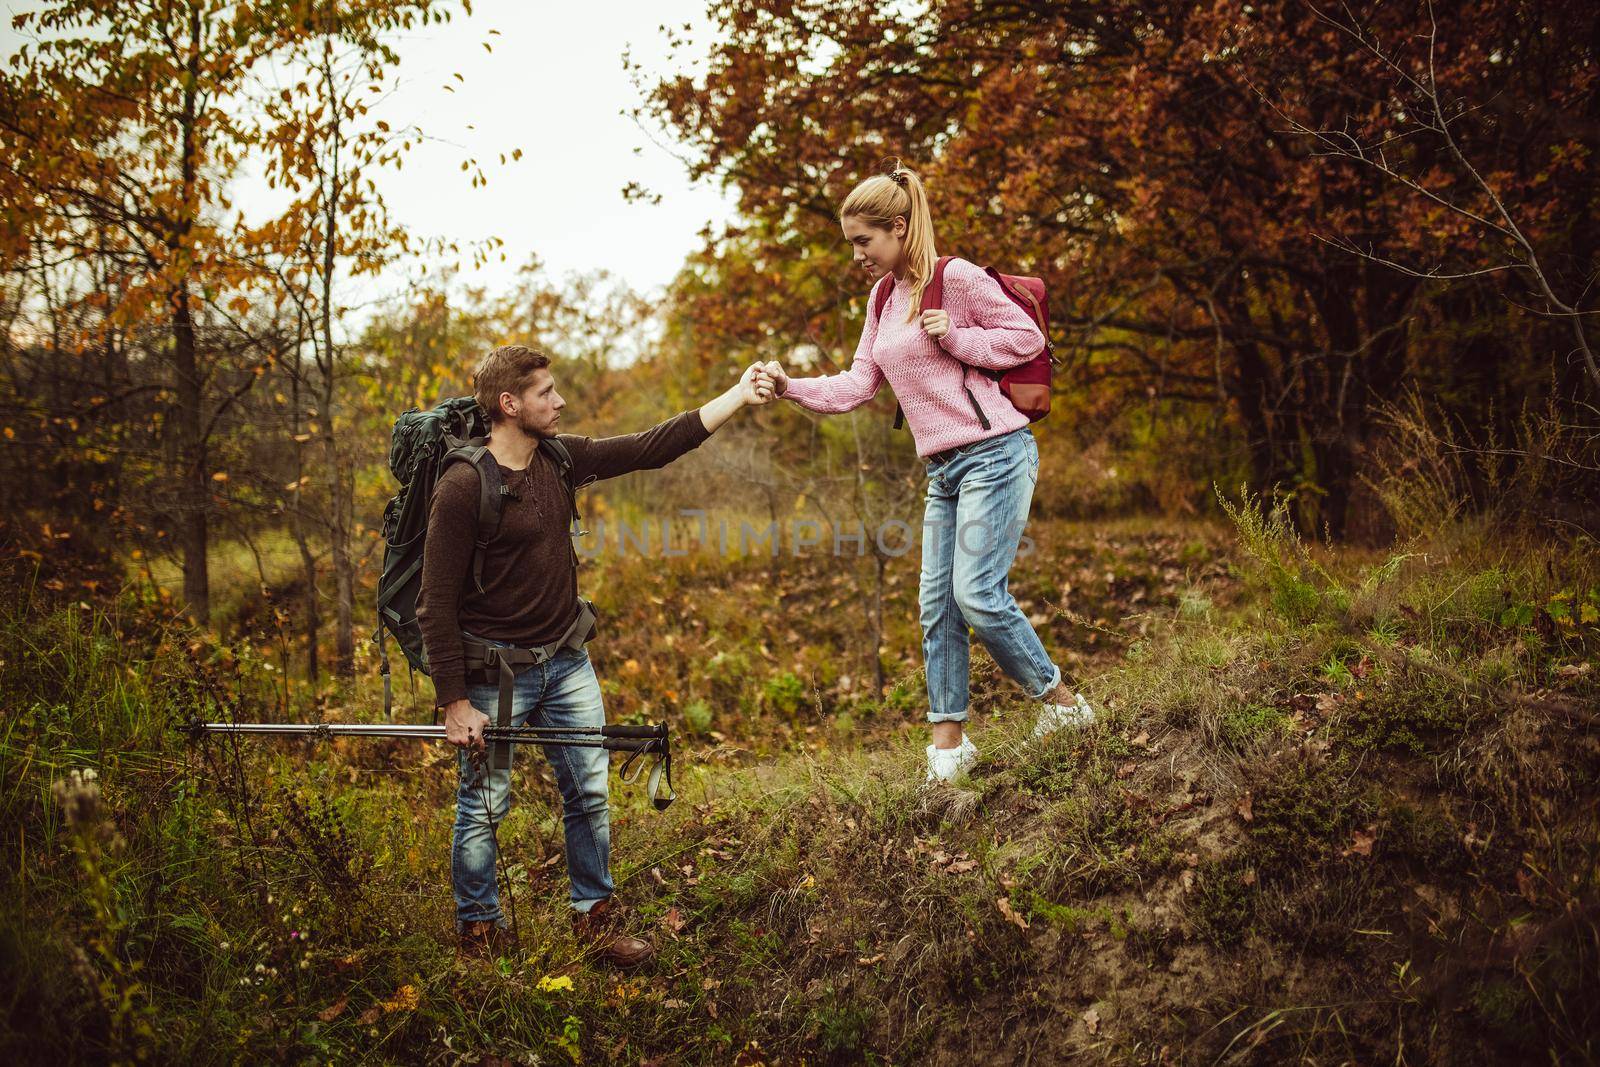 Intelligent tourist supports his woman on a hill descent. A man holds a woman's hand while supporting her on a difficult walking route. Hiking concept by LipikStockMedia